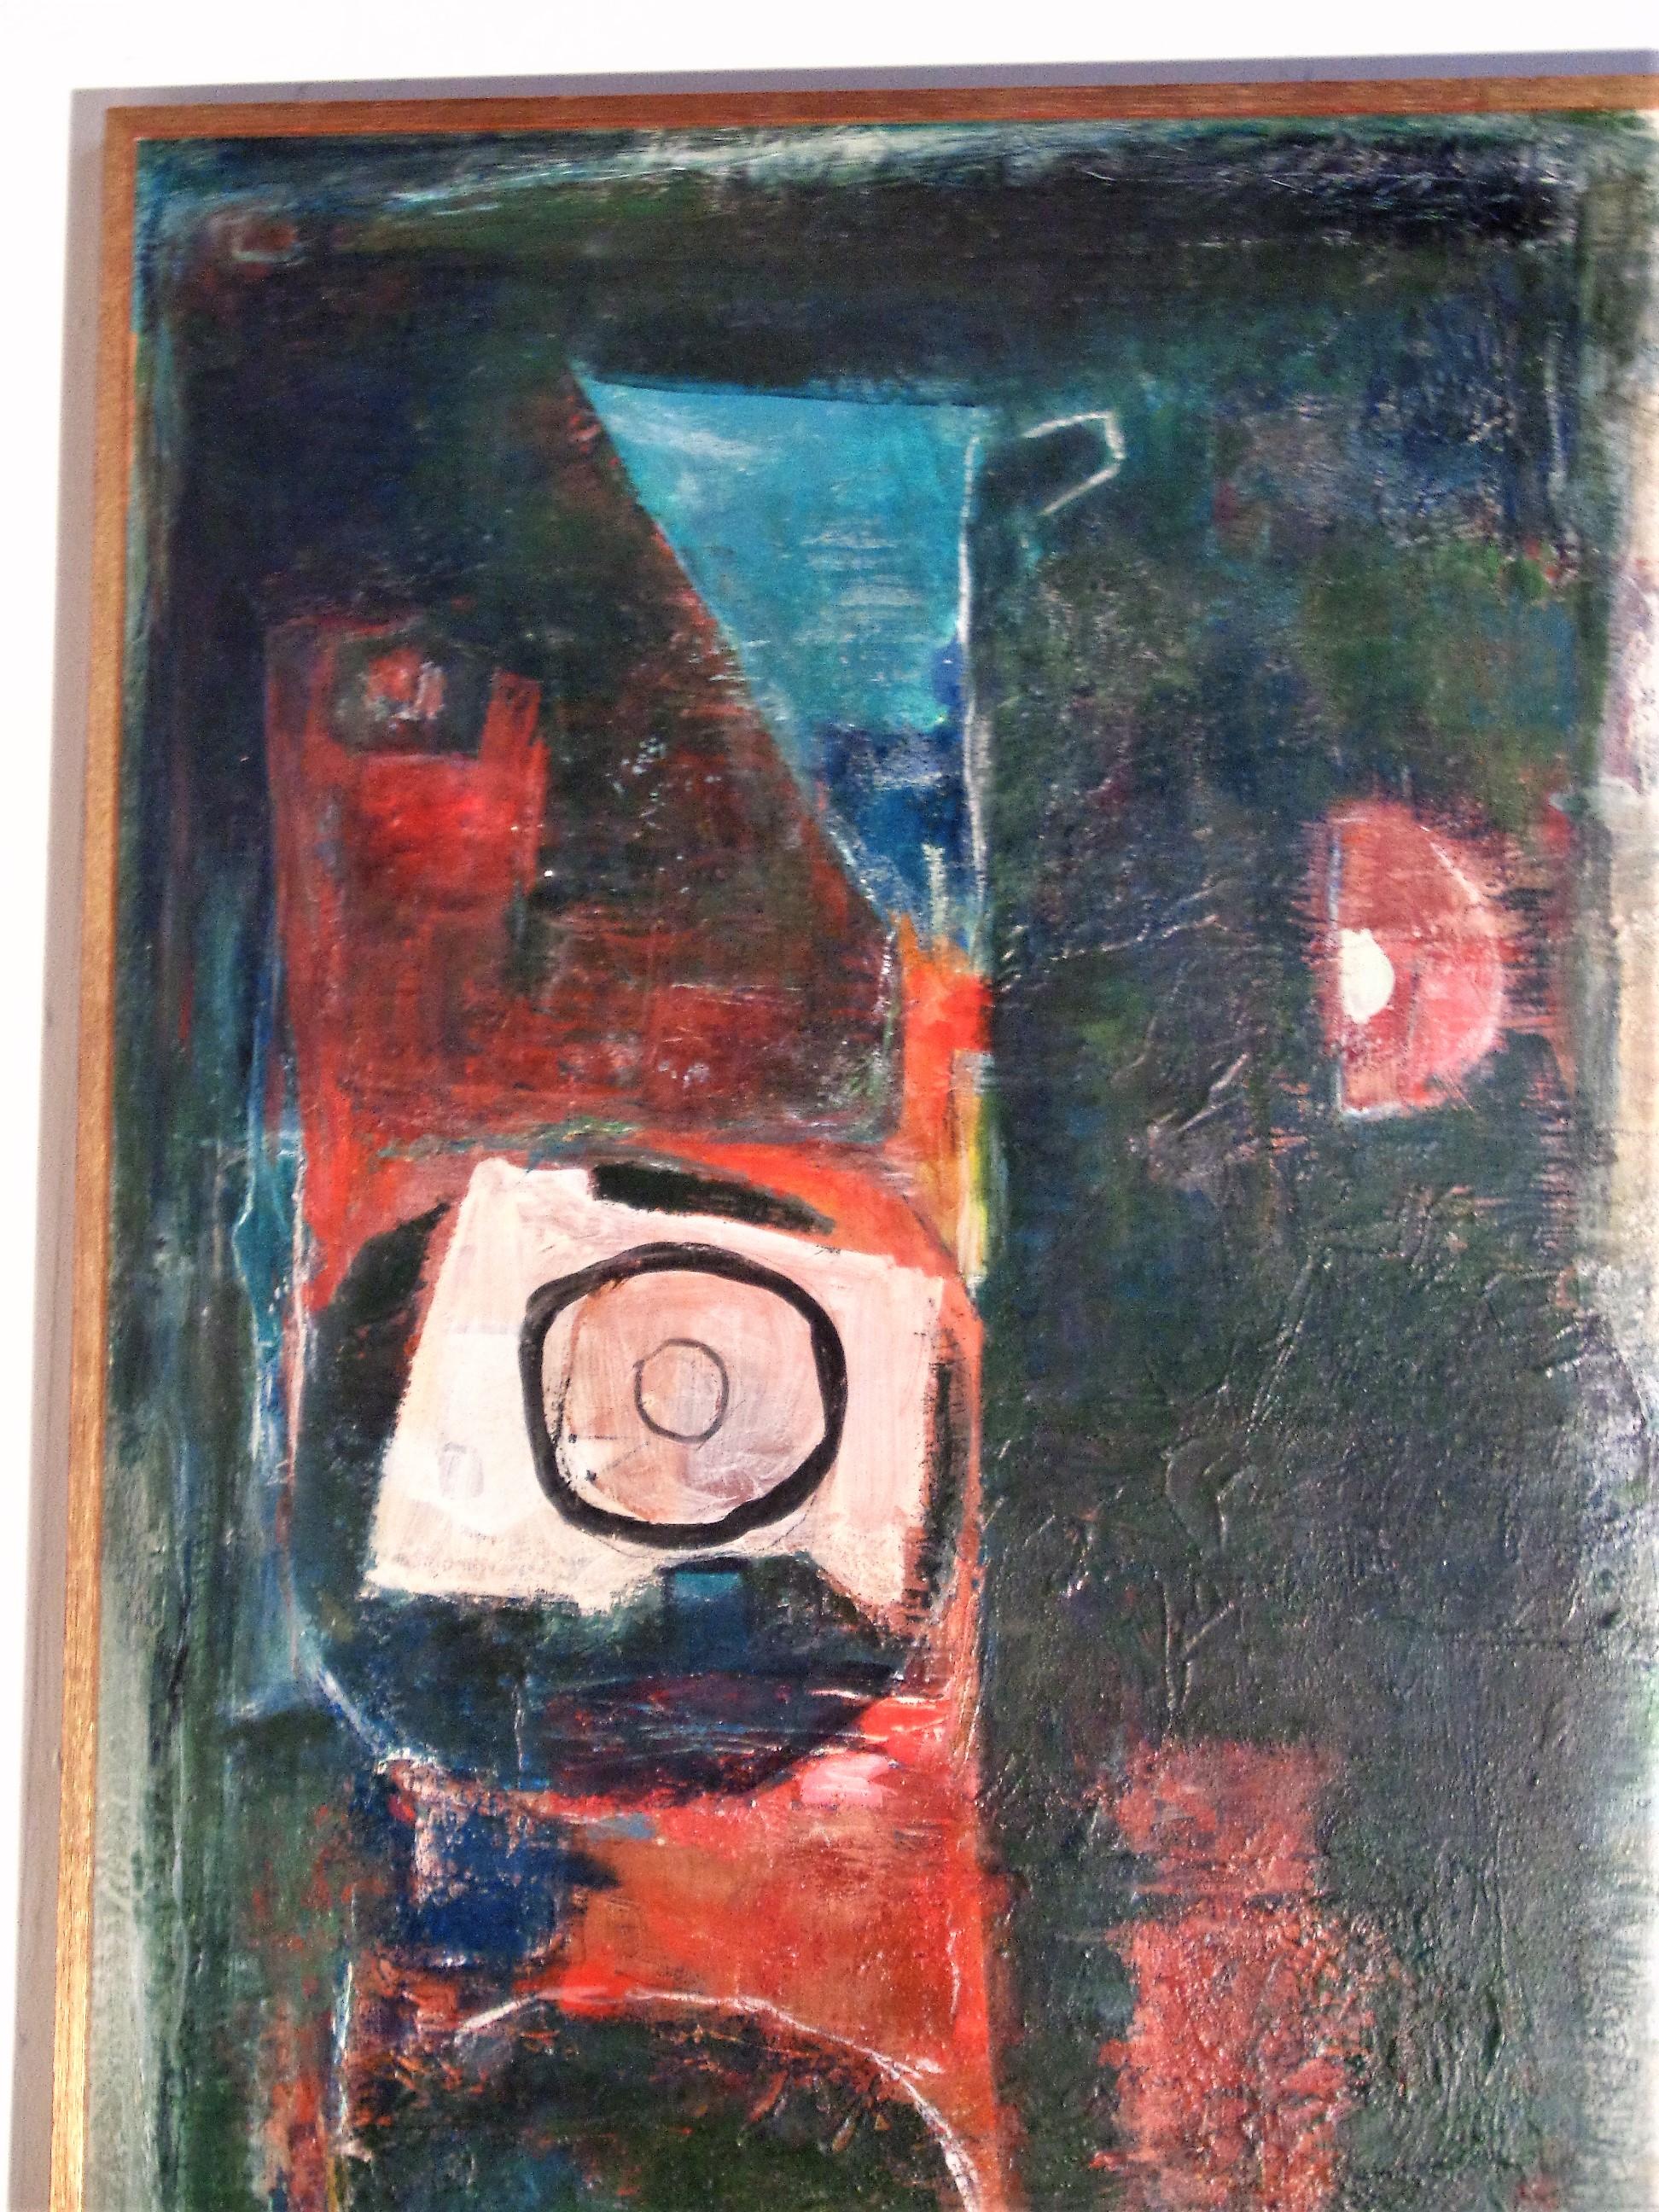 American Abstract Modernist Painting by Hilda Altschule, 1972